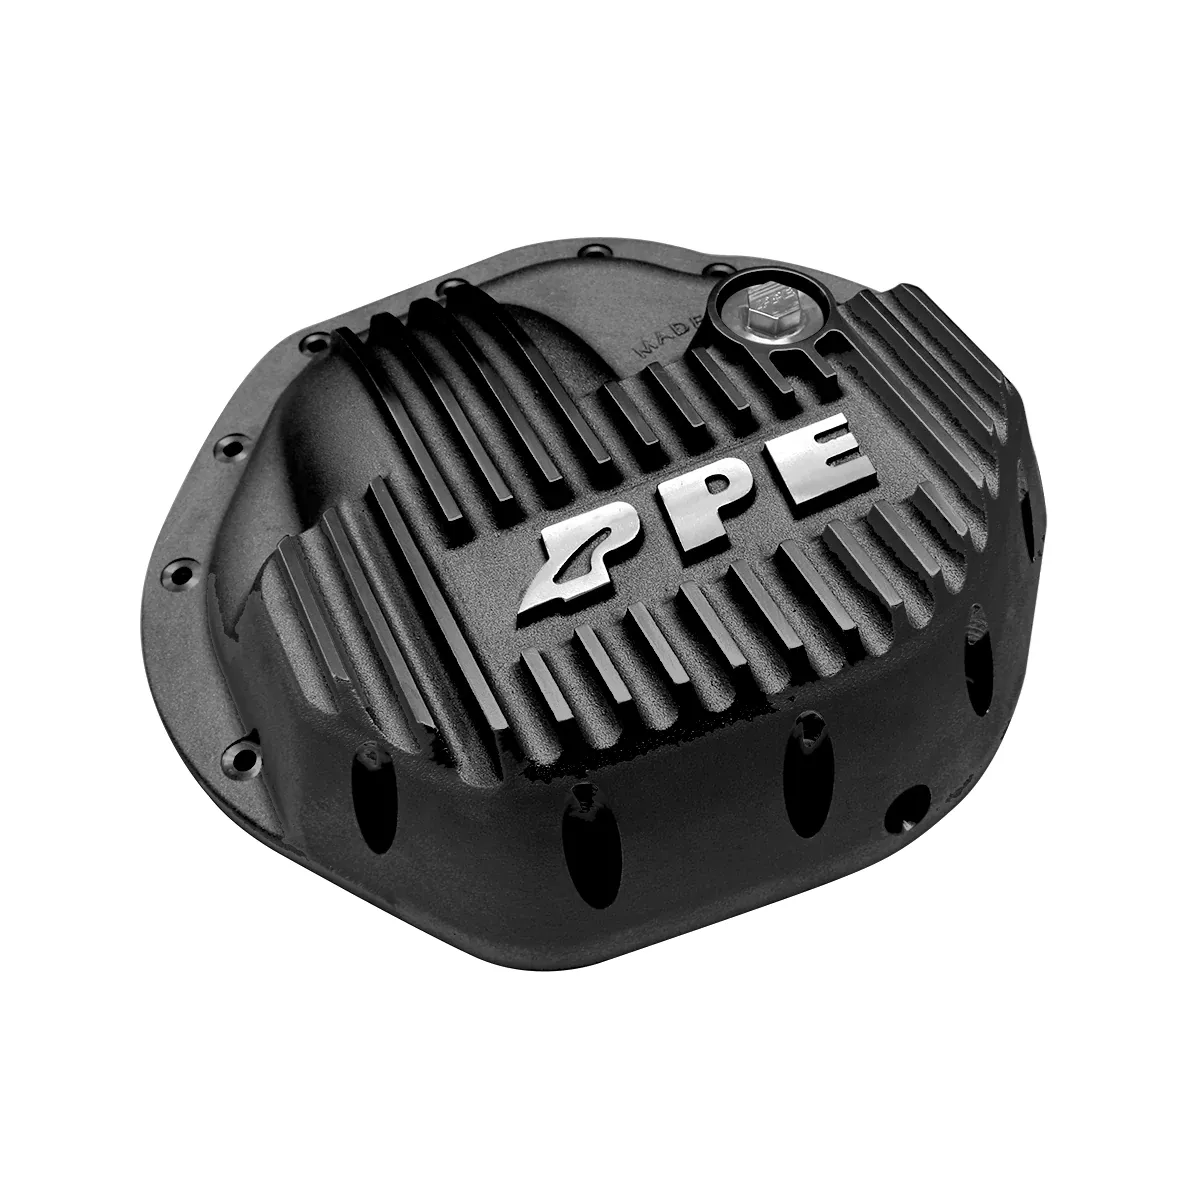 PPE - PPE Black HD Front Differential Cover For 2002-2014 Dodge Ram 2500/3500